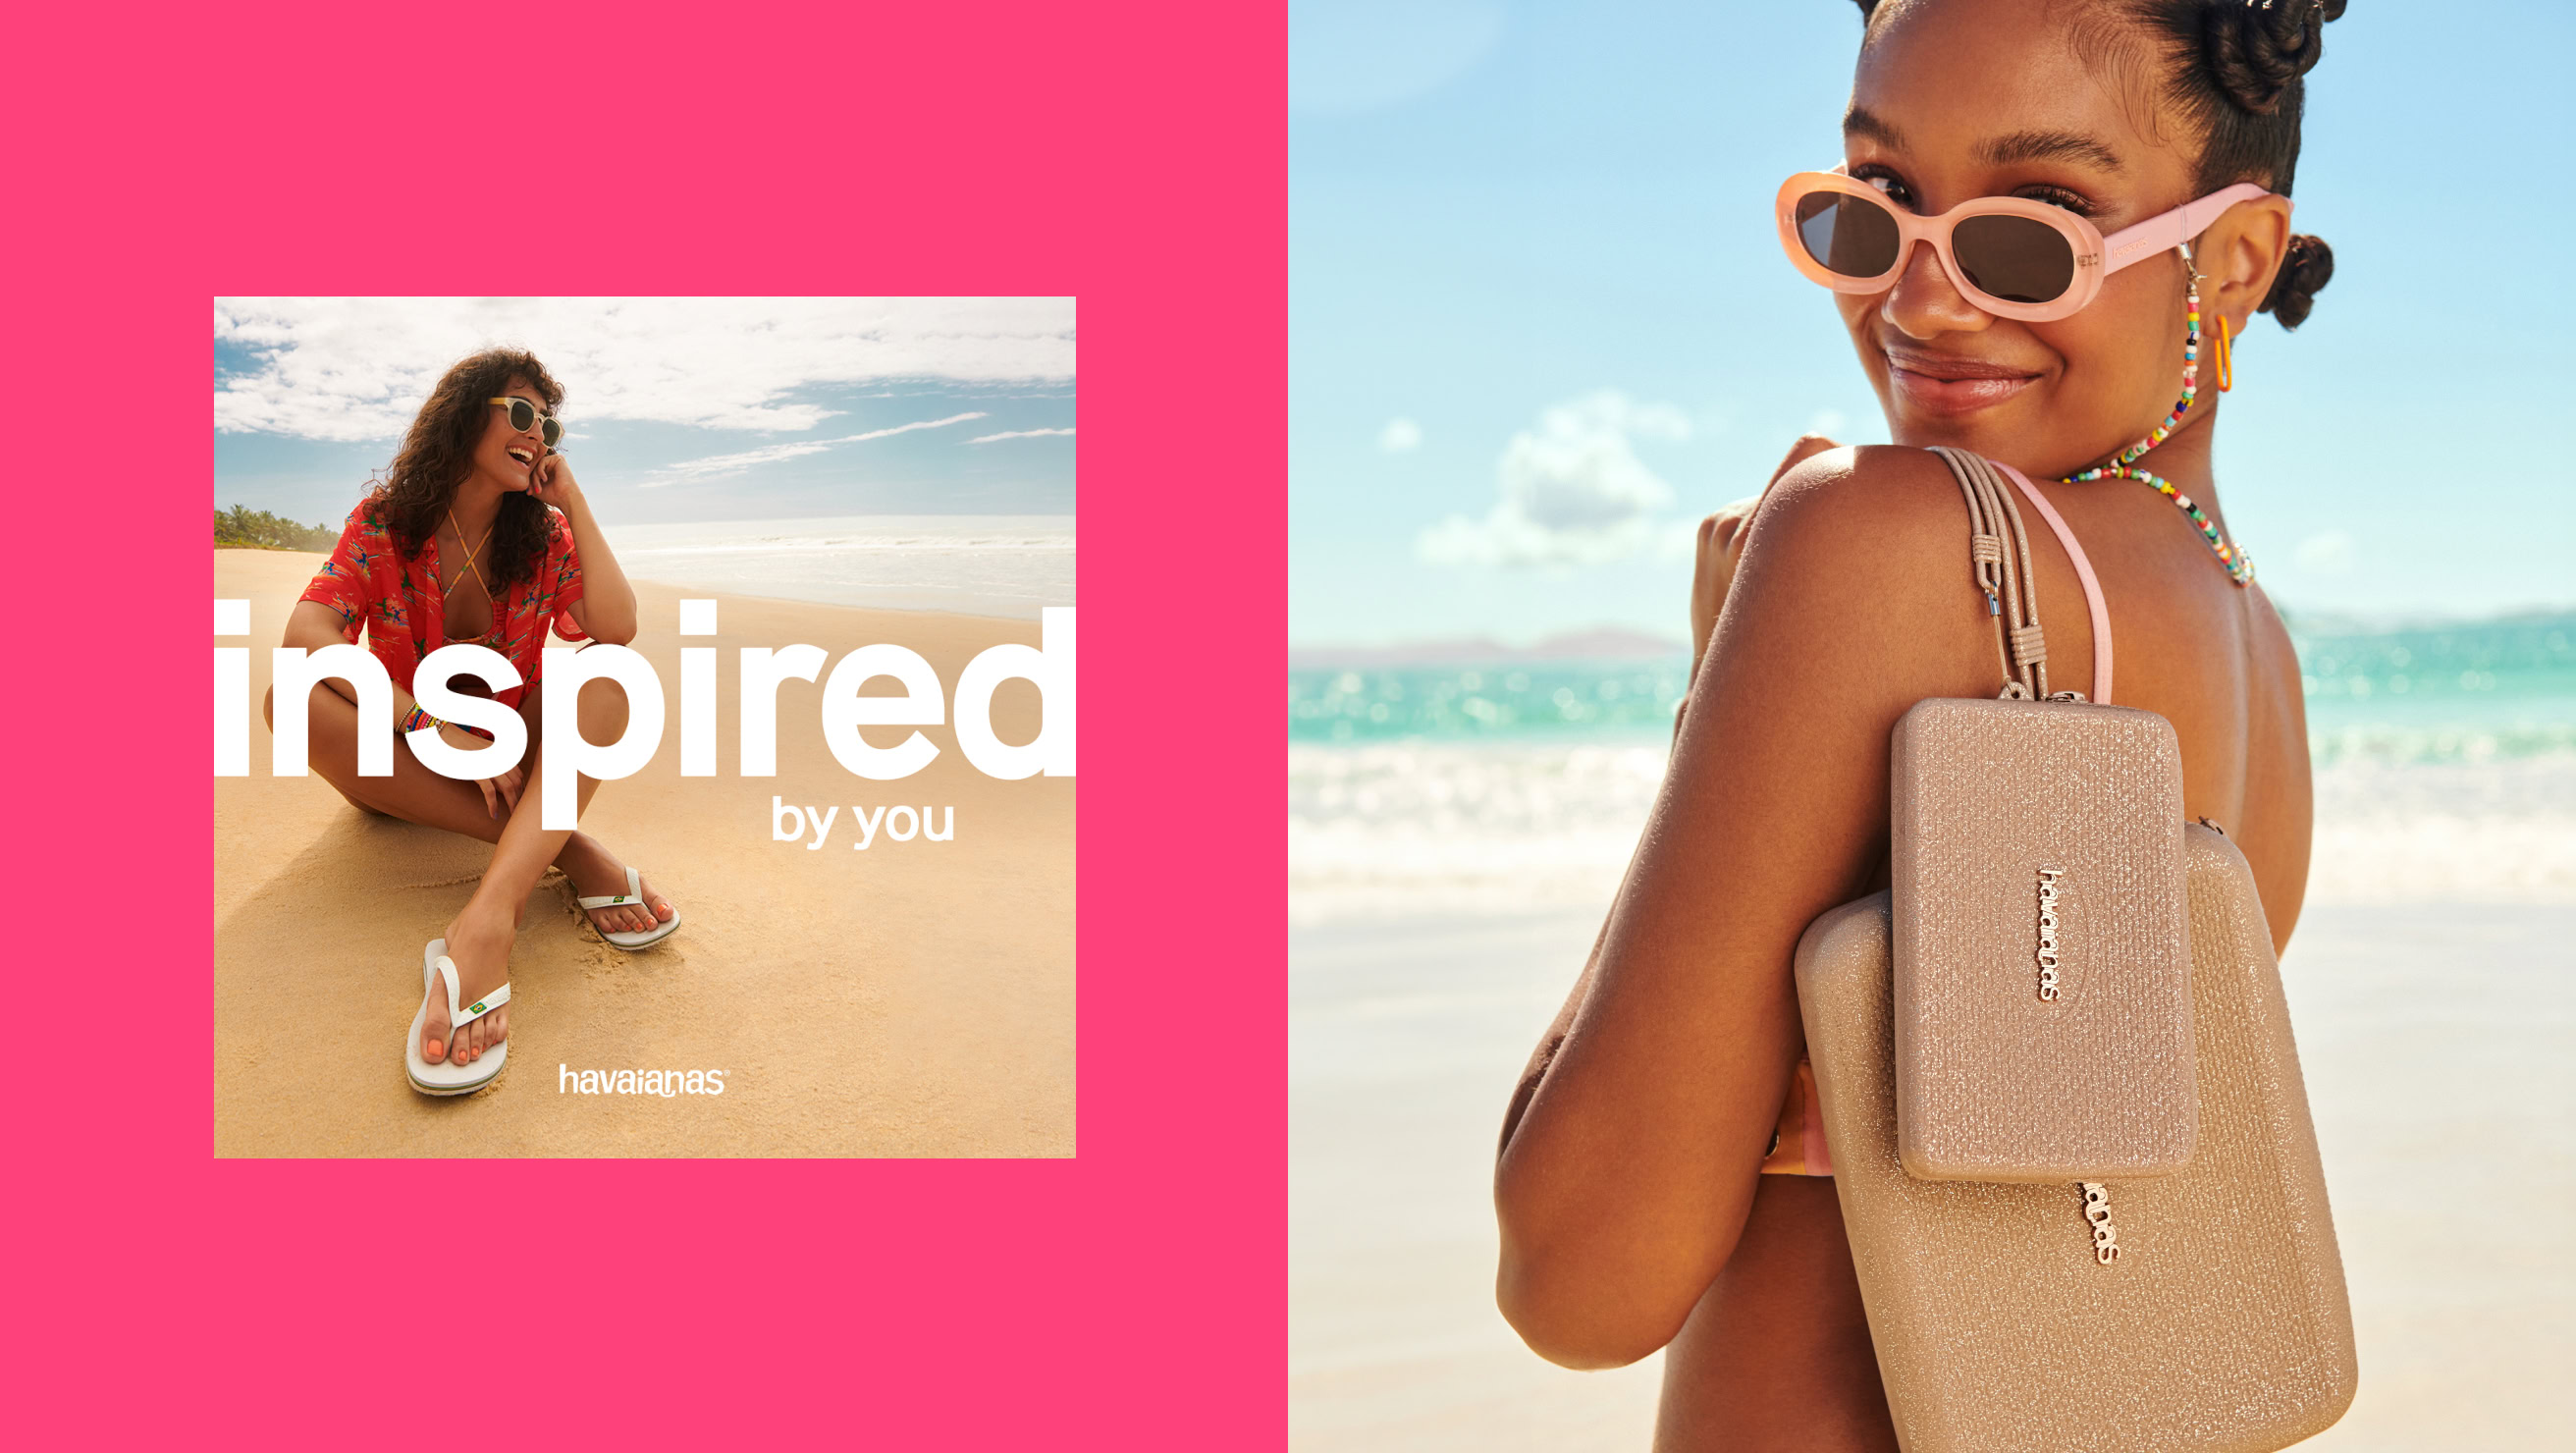 Two-part advertisement featuring a young woman sitting on a beach in a red dress on the left, and a close-up of another smiling young woman wearing sunglasses and holding a glittery purse on the right.